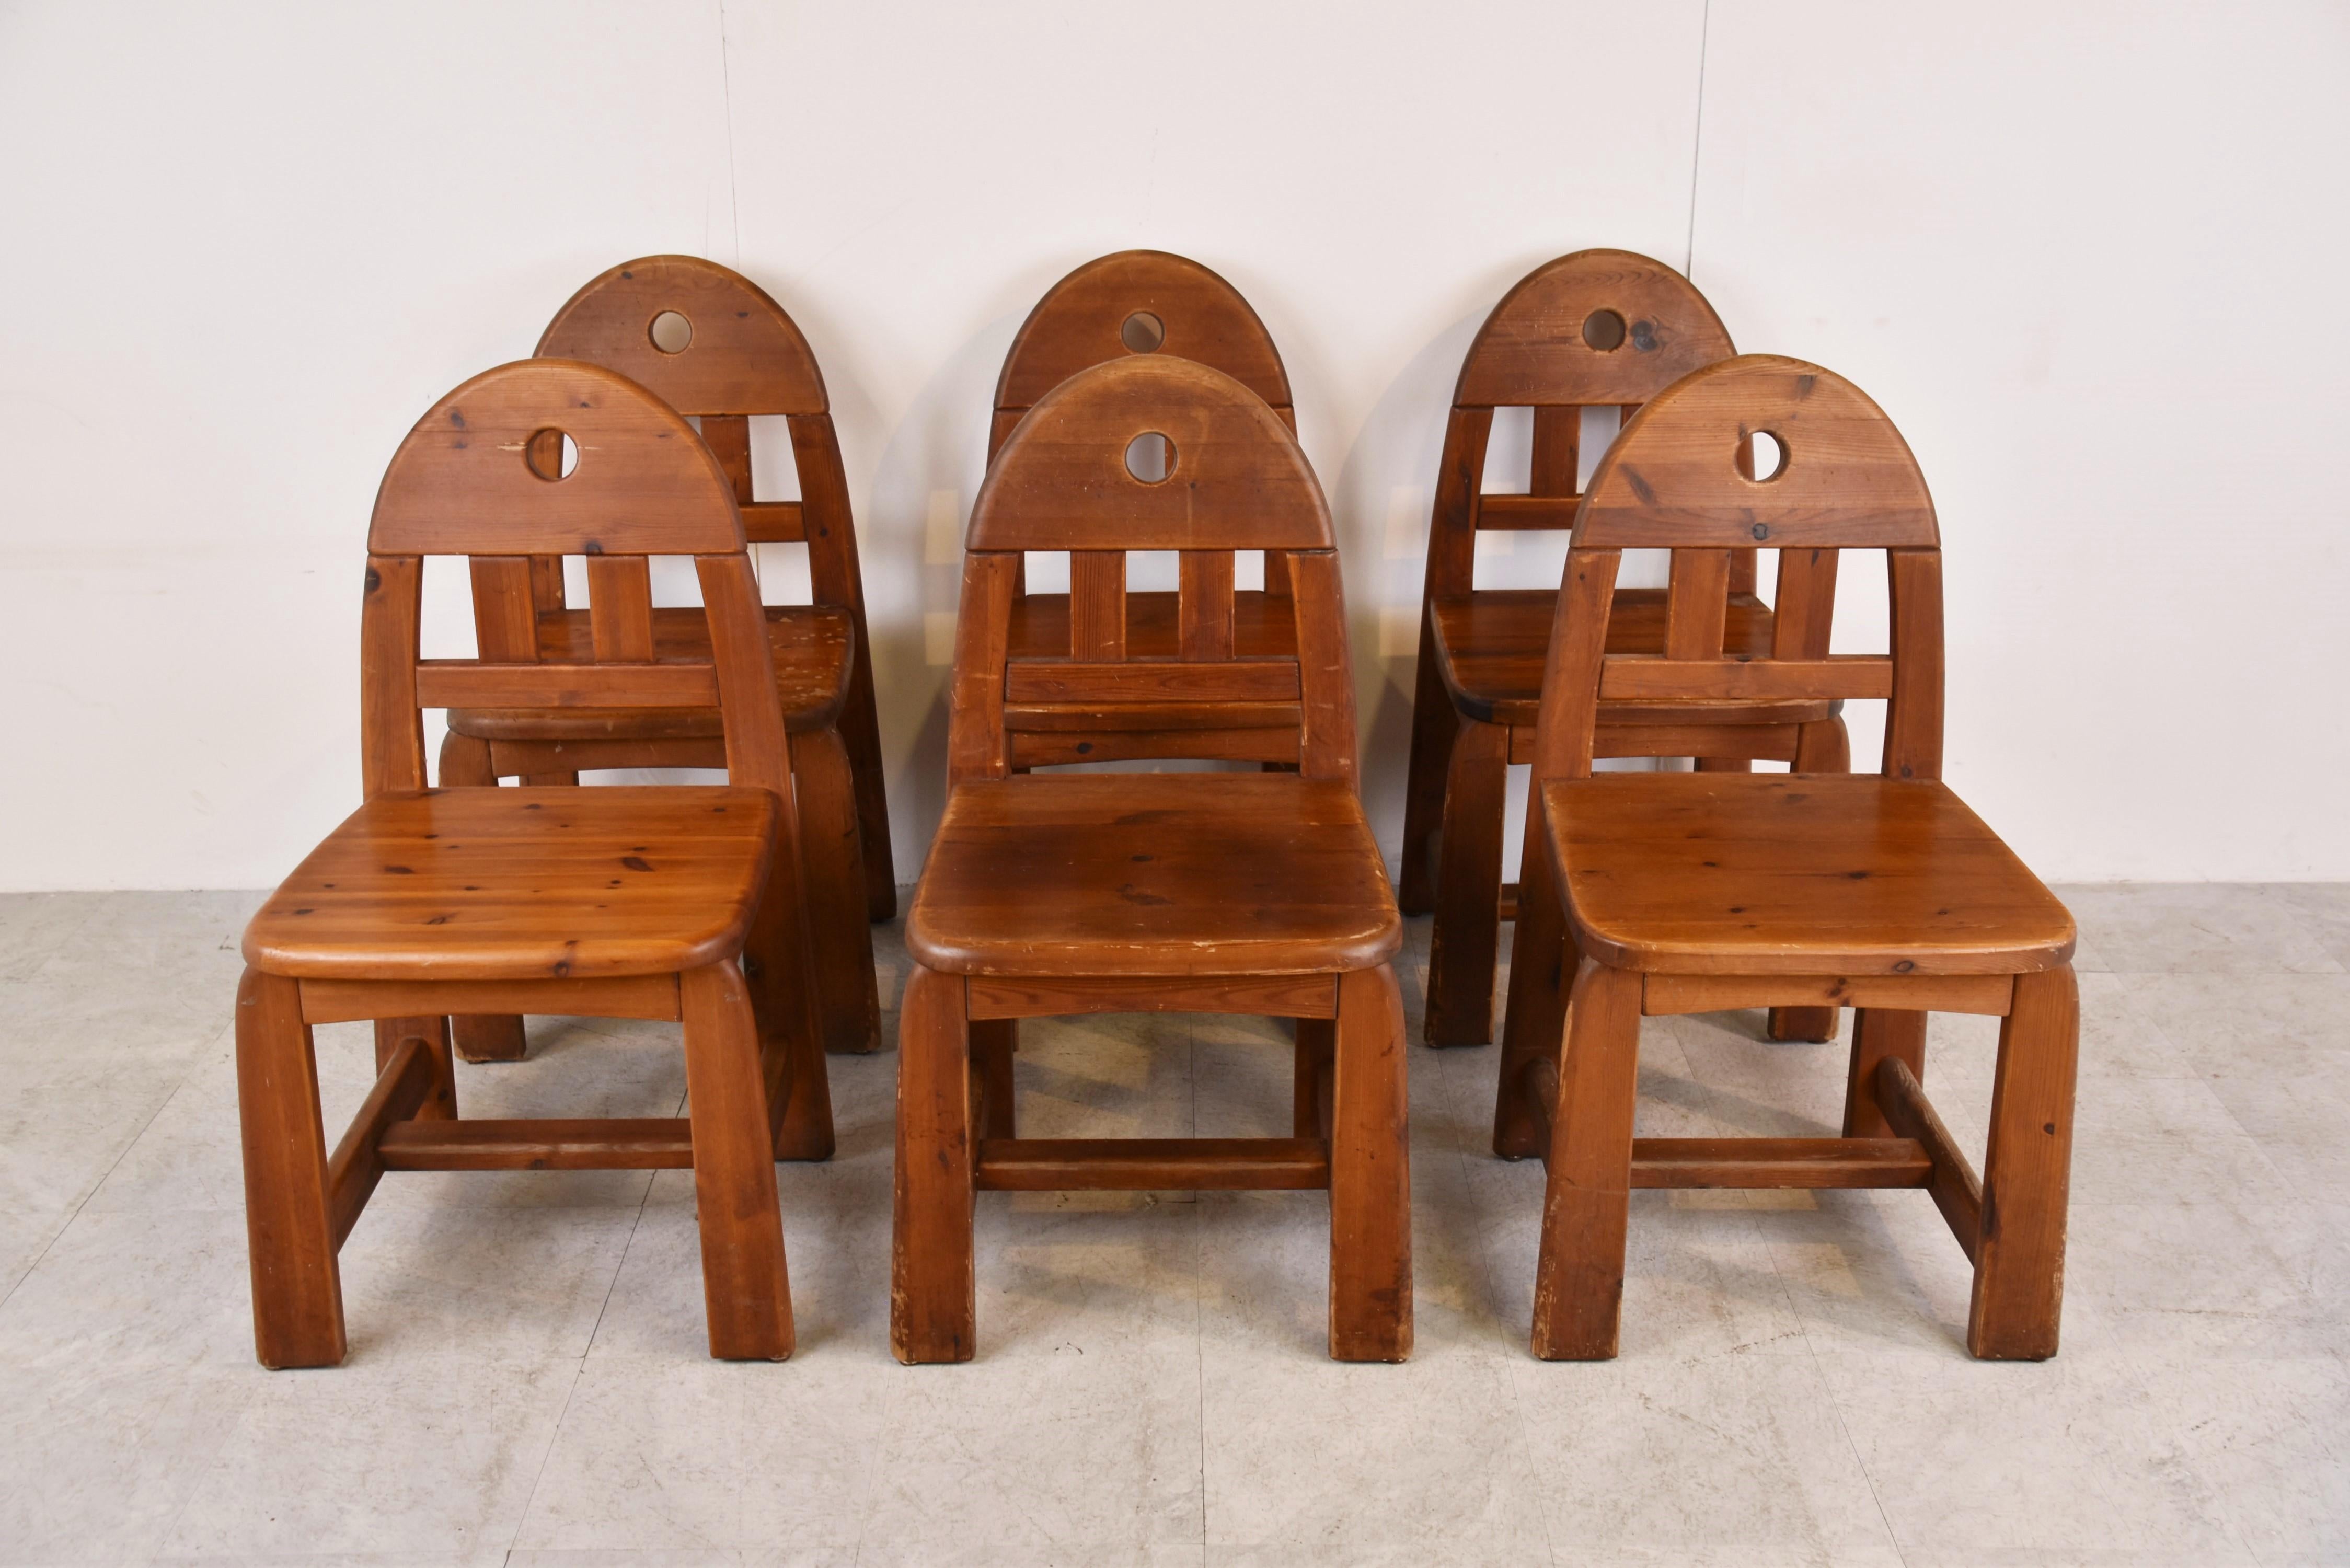 Scandinavian Modern Vintage Pine Wood Dining Chairs, 1980s For Sale